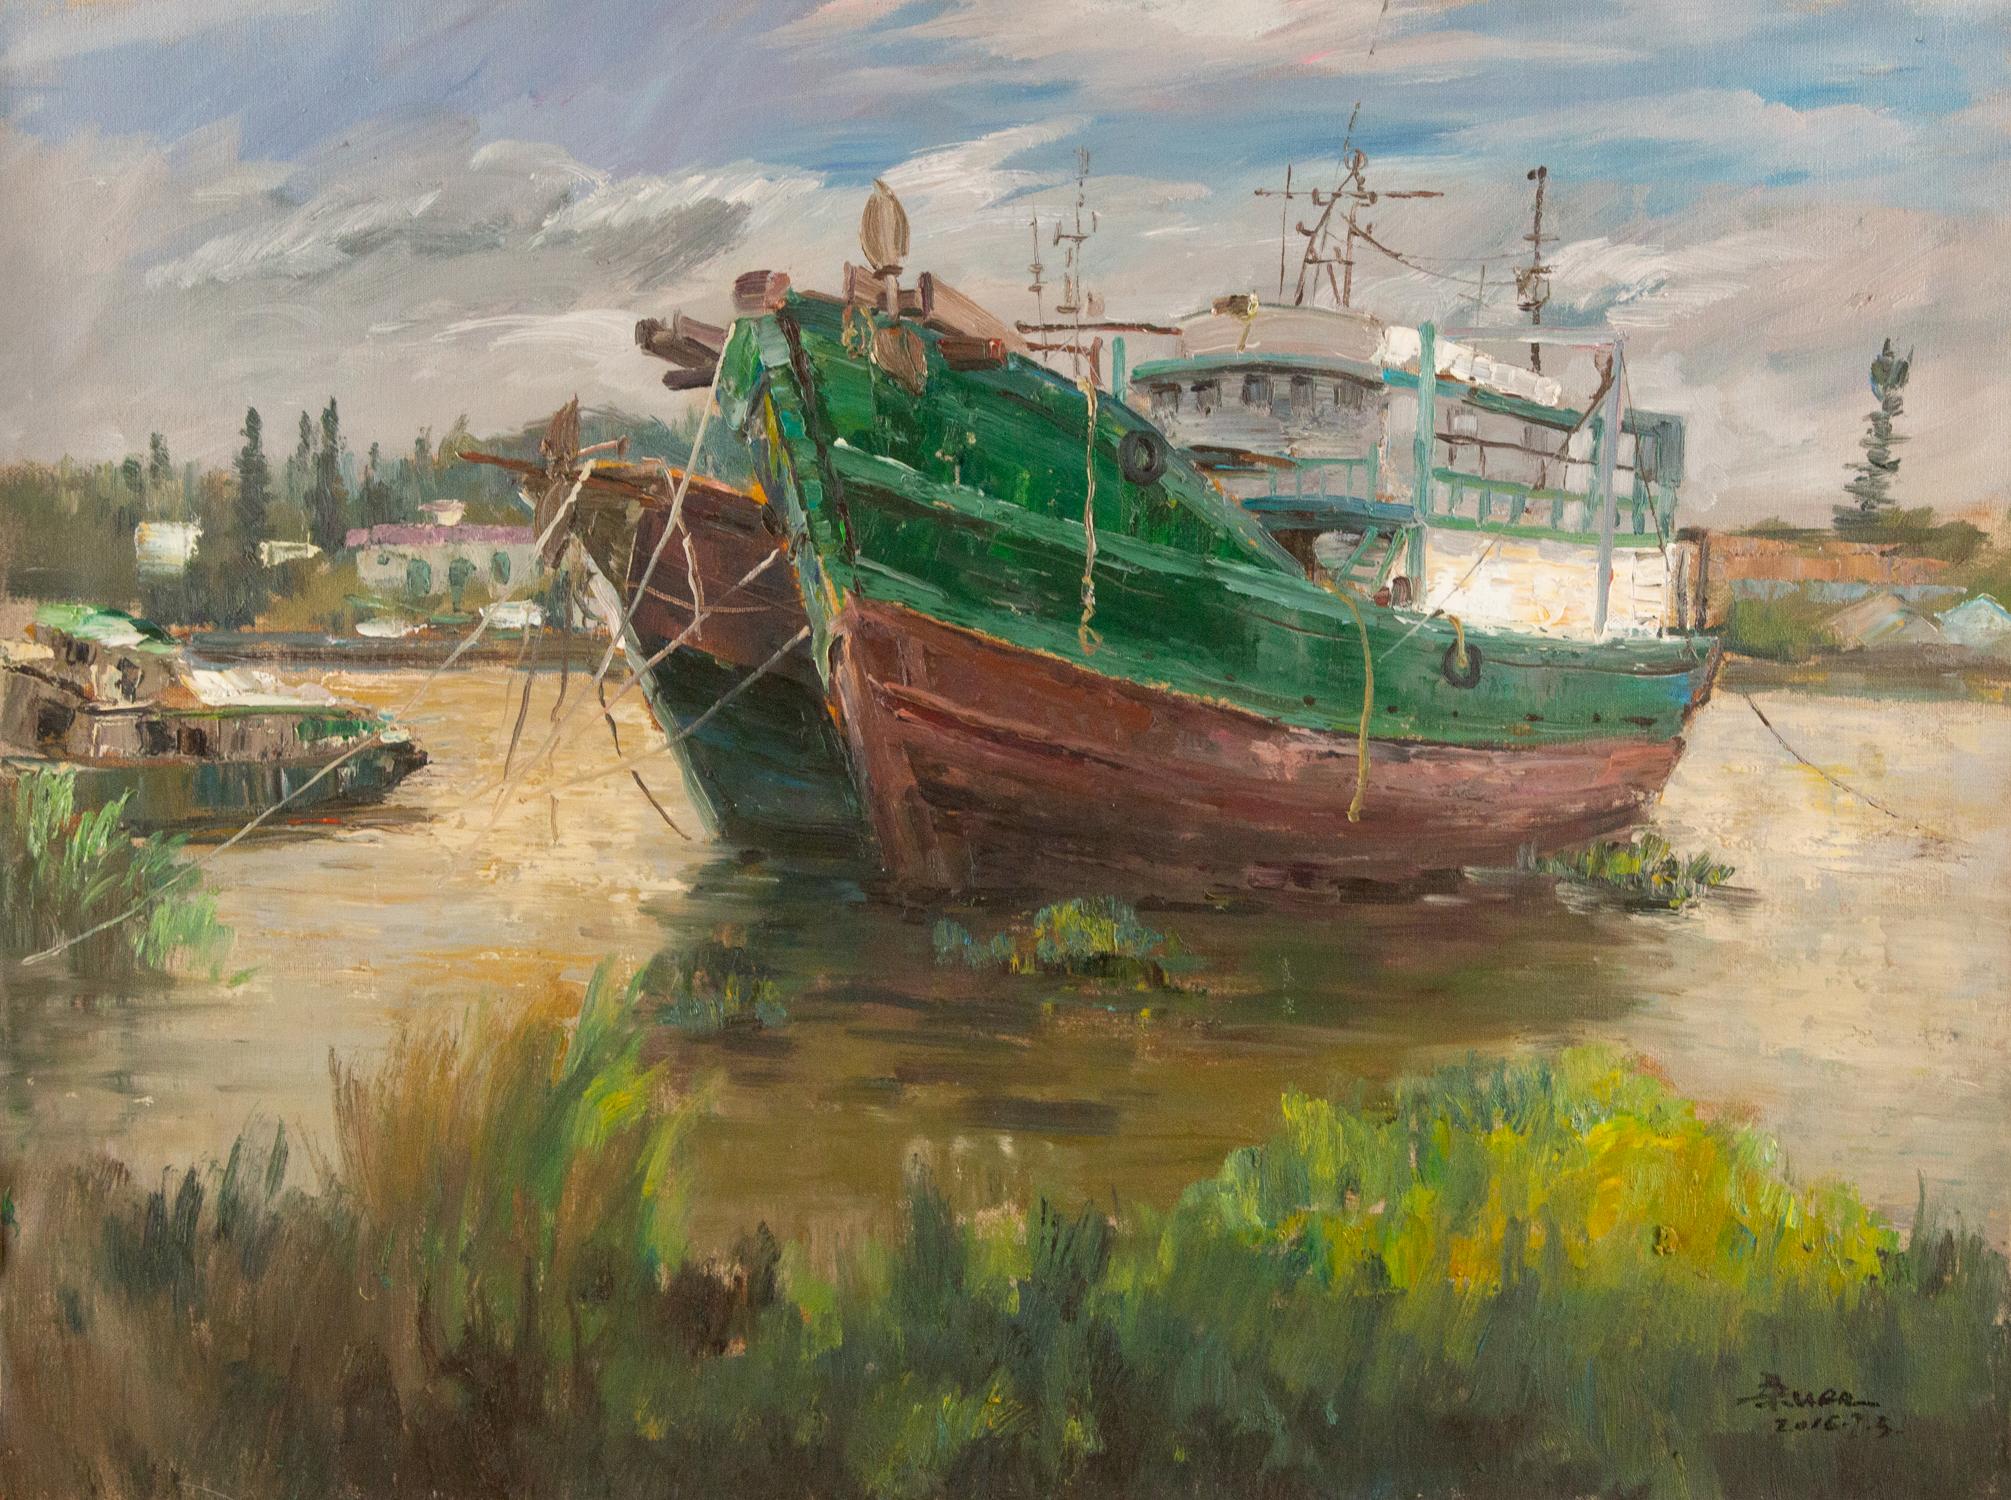 Title: Green Boat
Medium: Oil on canvas
Size: 23.5 x 31.25 inches
Frame: Framing options available!
Condition: The painting appears to be in excellent condition.
Note: This painting is unstretched
Year: 2016
Artist: Liang Guiwen
Signature: